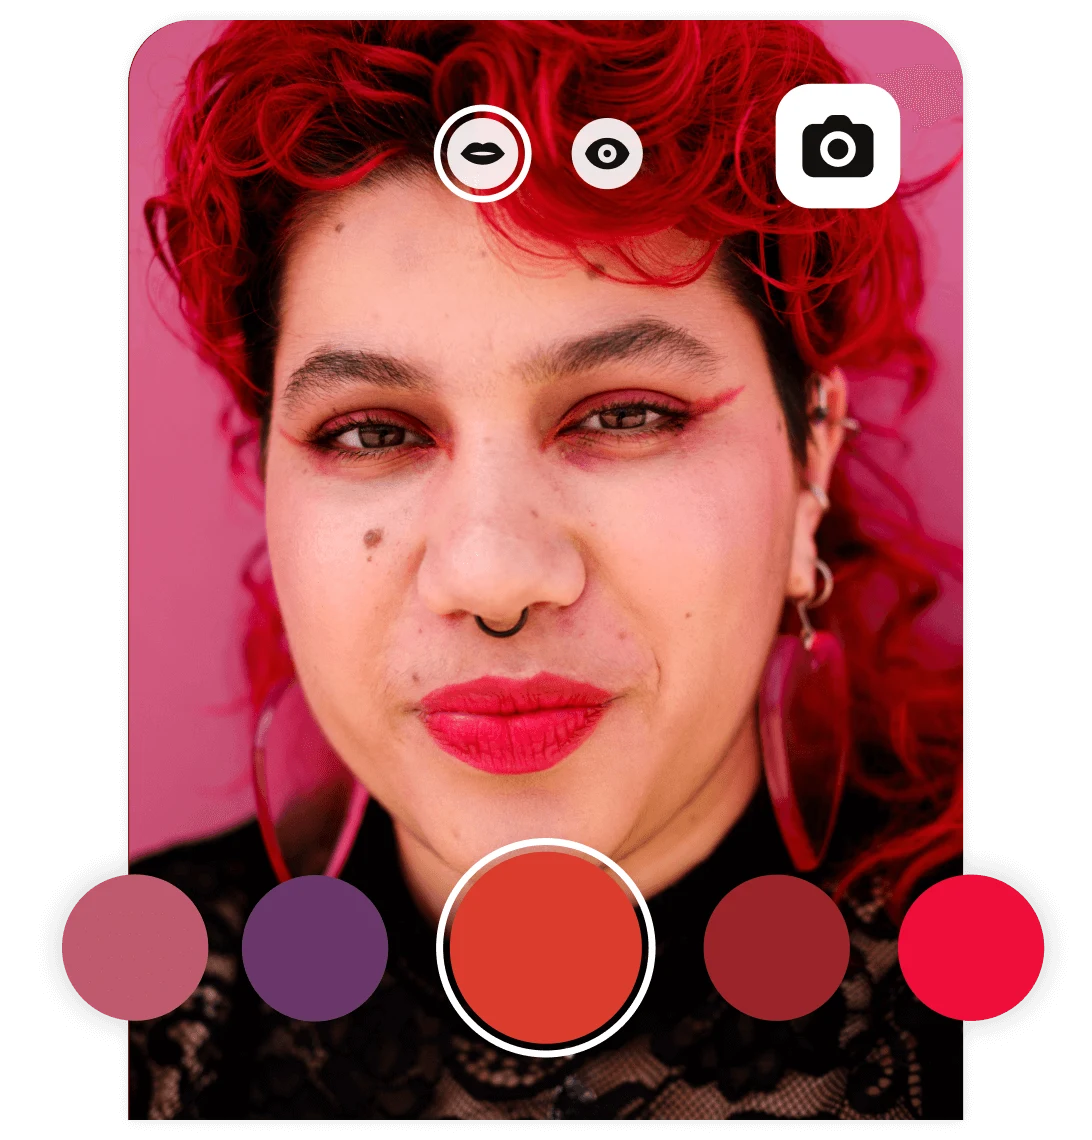 Person with bright, red hair using the virtual try-on feature for different eye and lip make up looks.